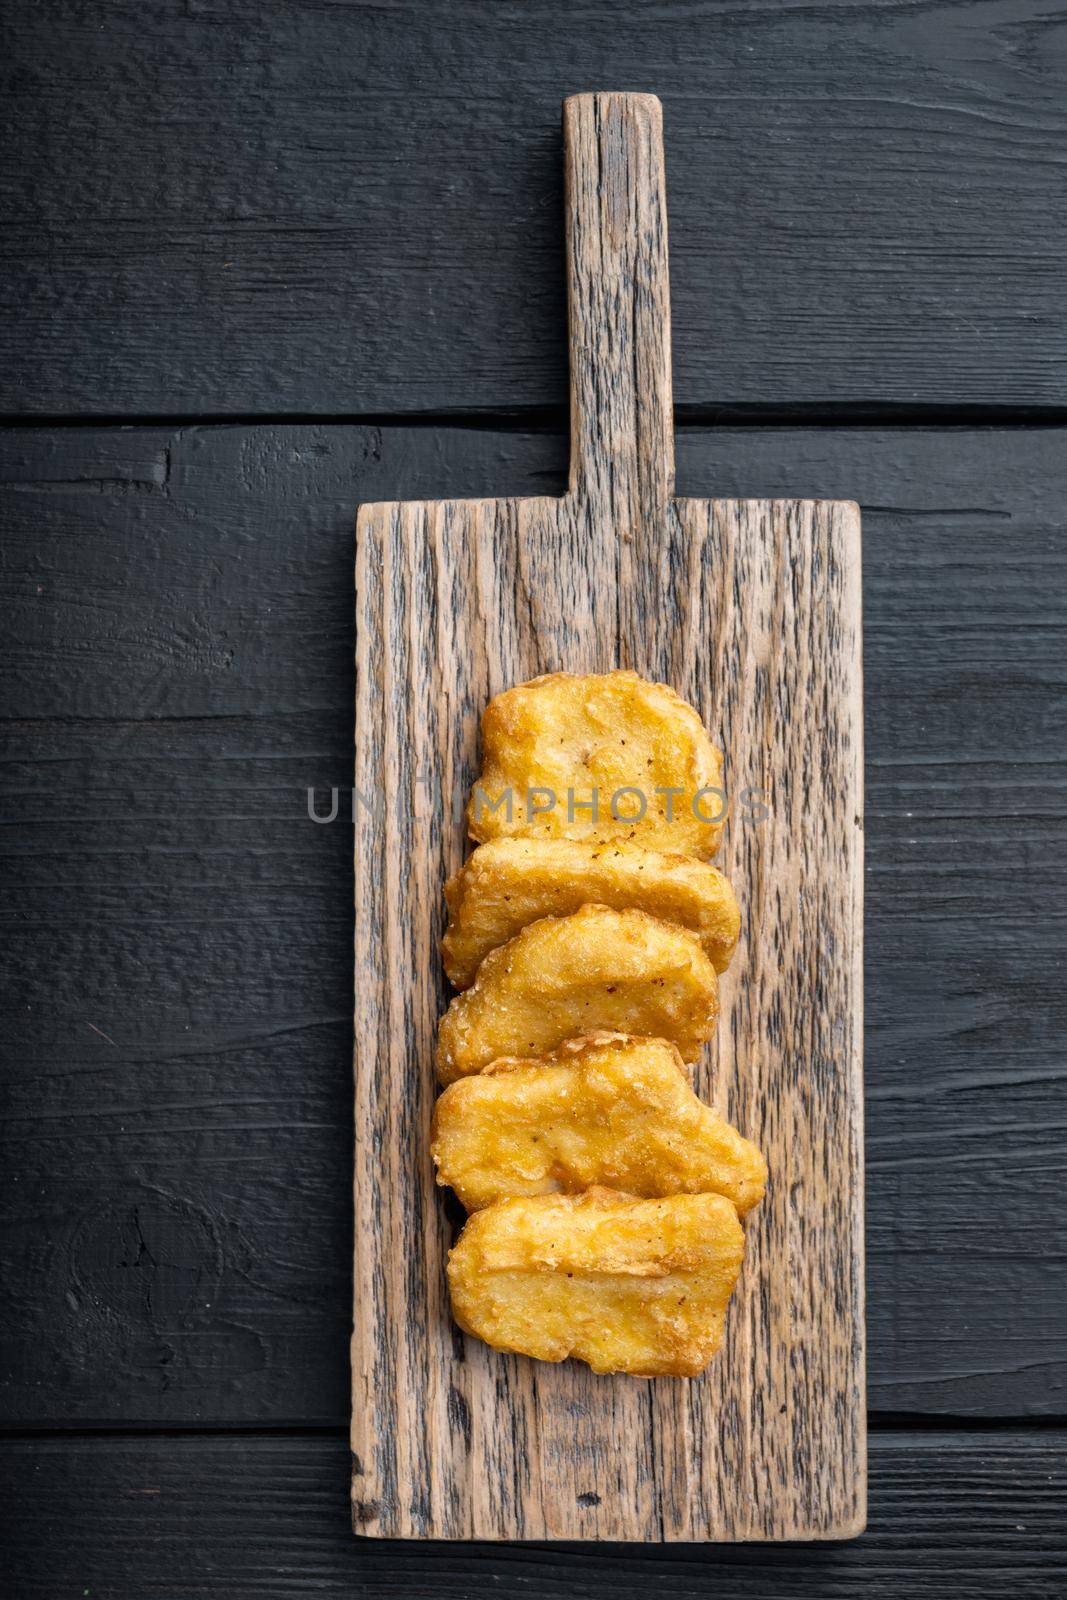 Fried crispy chicken nuggets on black wooden background, flat lay by Ilianesolenyi